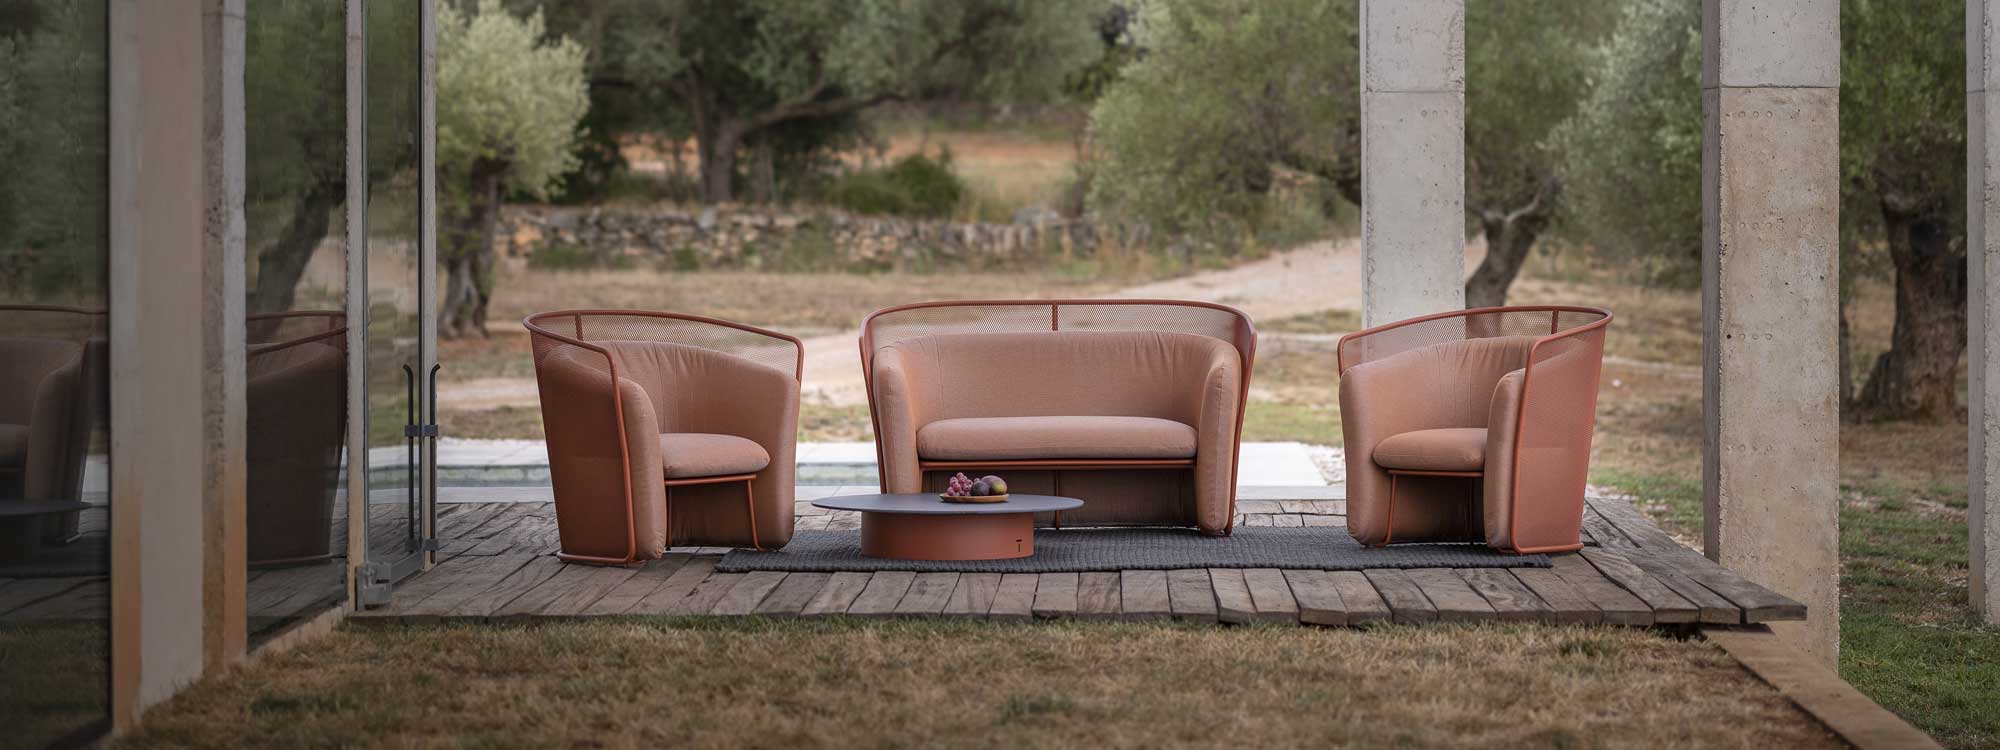 Image of Salmon-Beige coloured Slide modern 2 seat garden sofa, lounge chairs and Branta low table by Todus, on minimalist terrace with olive trees in the background